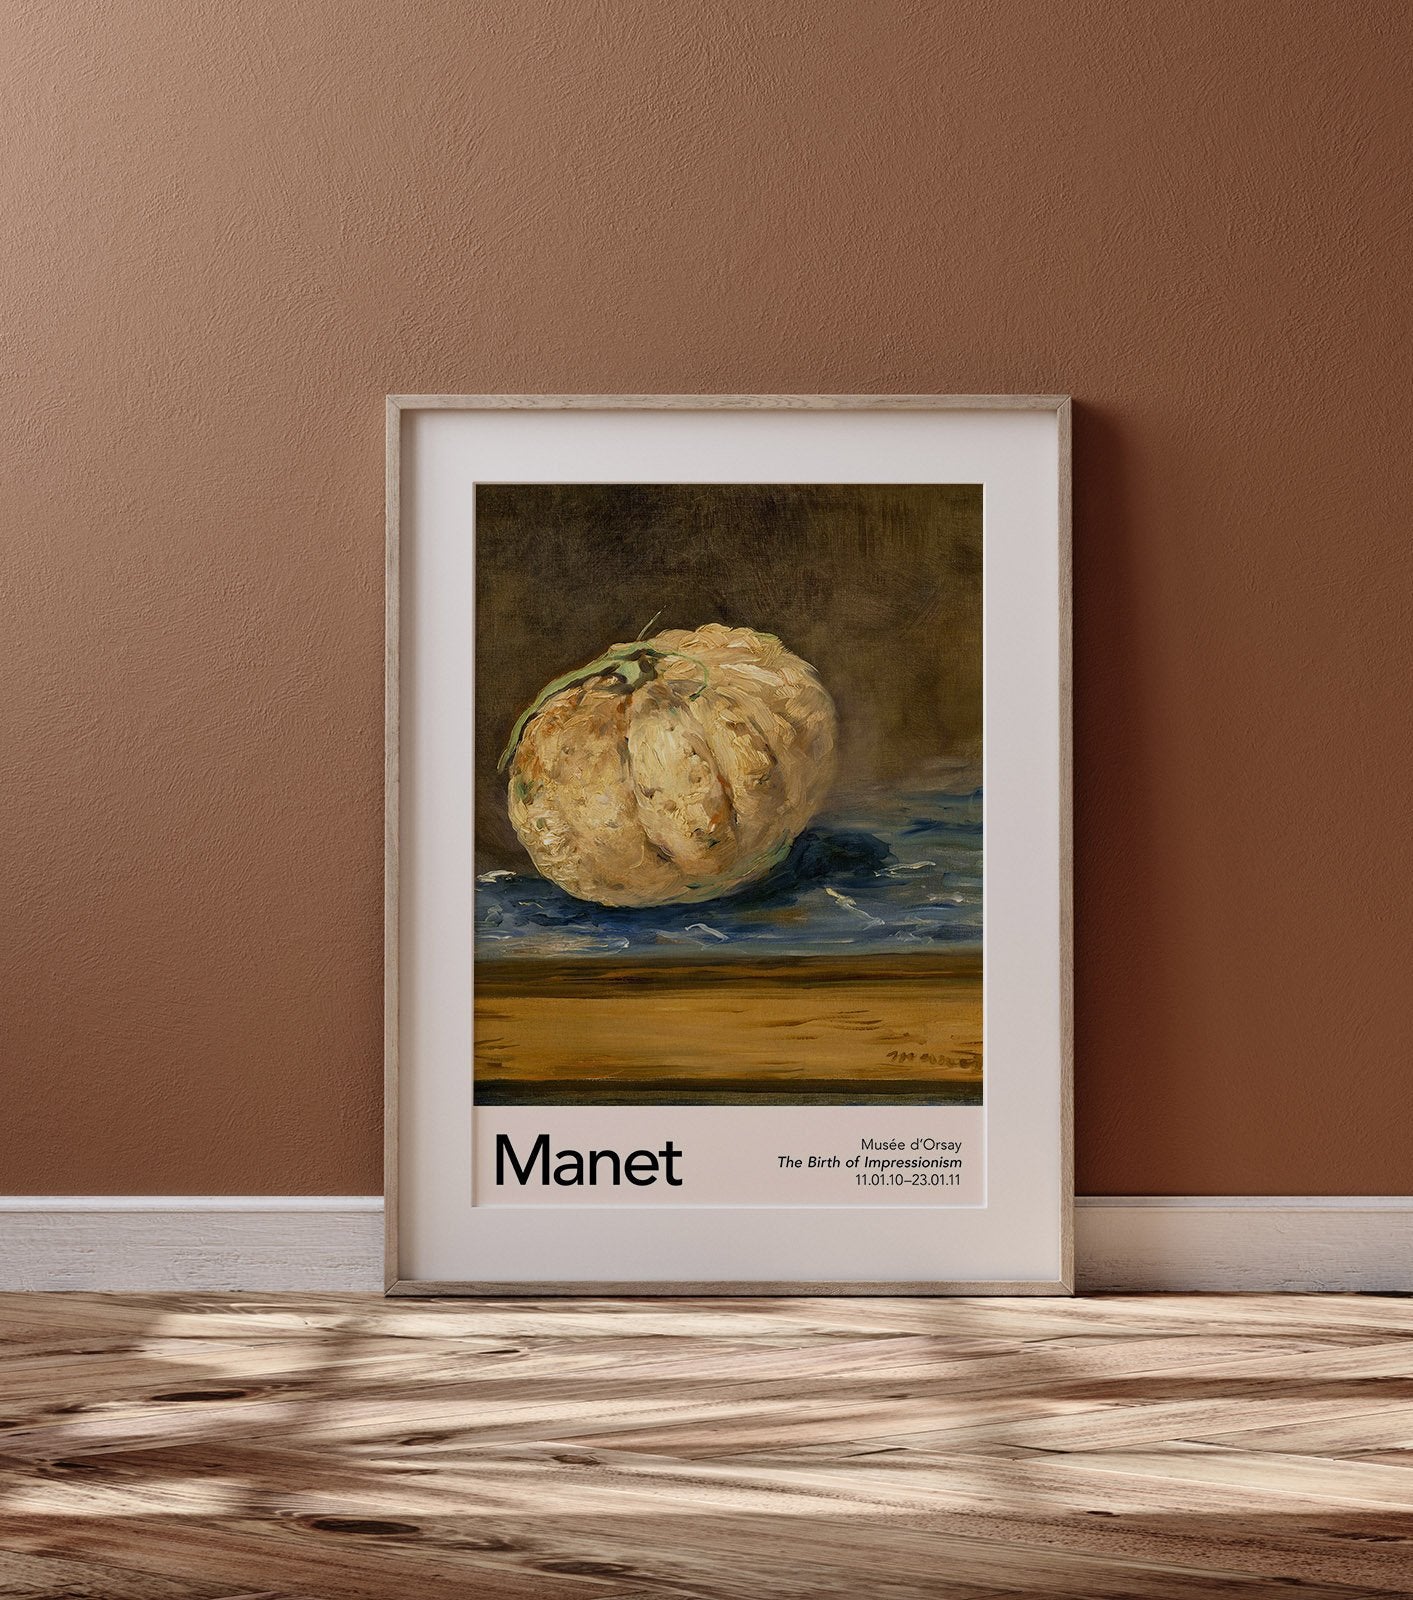 The Melon by Manet Exhibition Poster